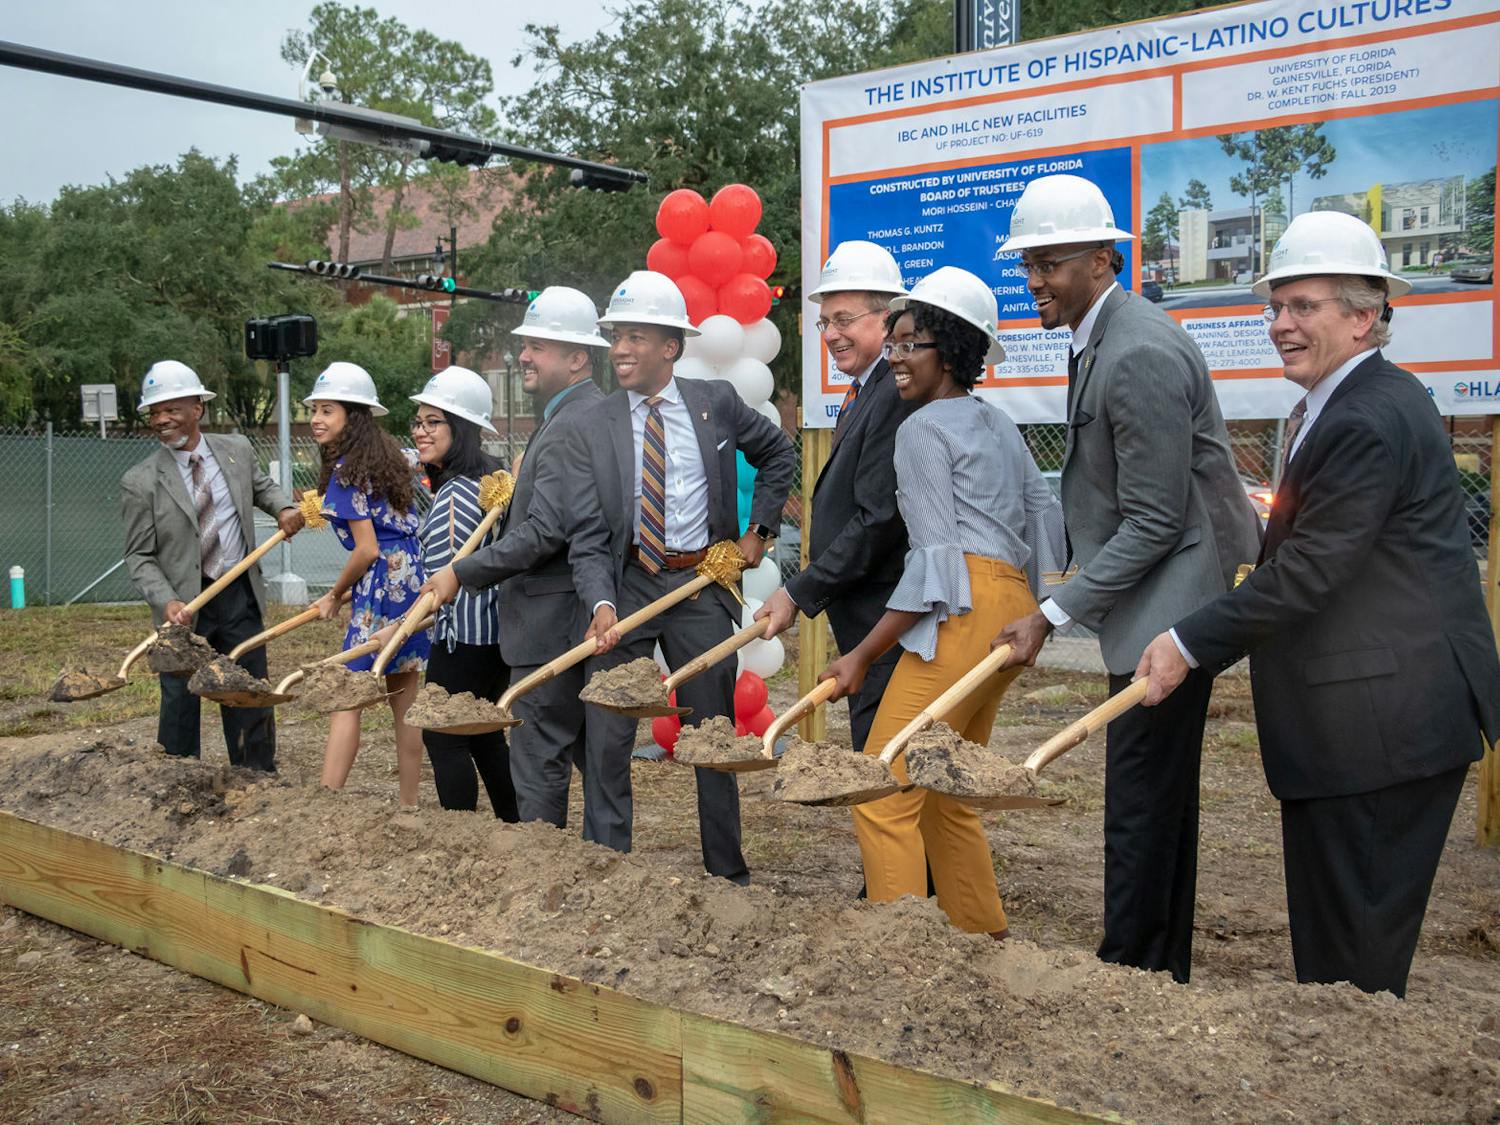 Leaders from the Institute of Black Culture and Institute of Hispanic-Latino Cultures, along with UF President Kent Fuchs and Student Body President Ian Green, break ground on the site of the new buildings for the IBC and La Casita located at 1510 W University Ave. on Wednesday evening.&nbsp;
&nbsp;